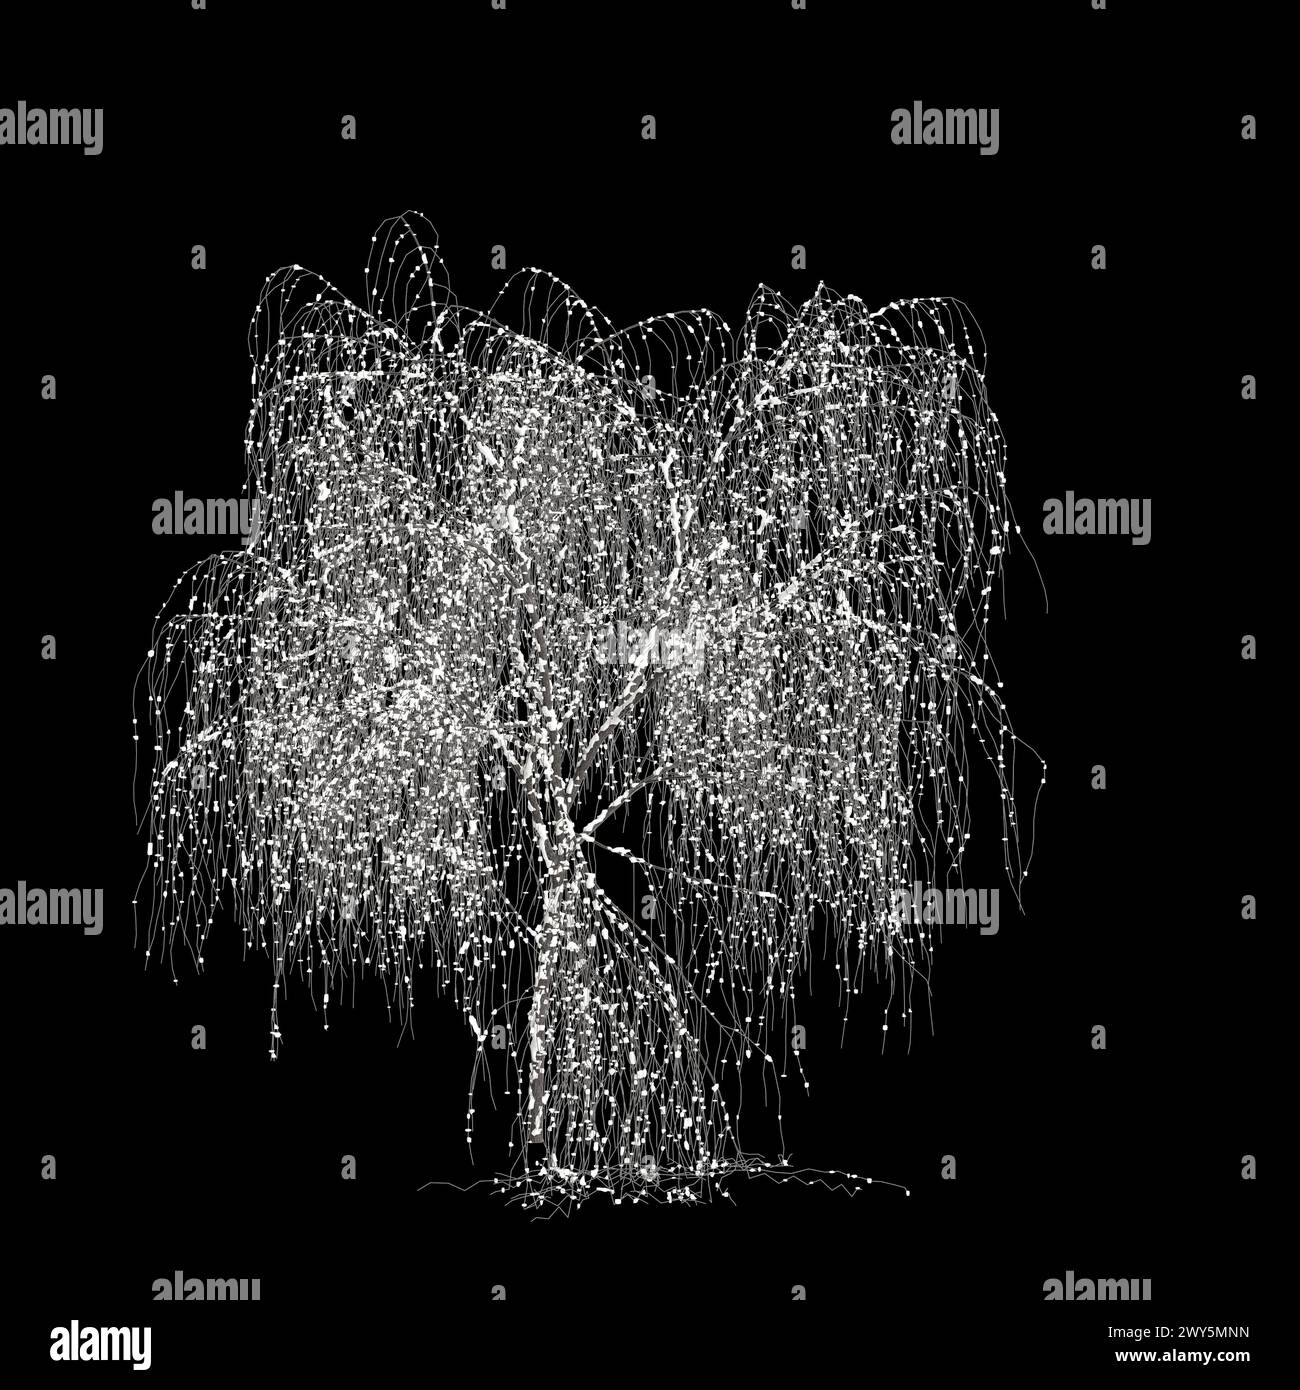 3d illustration of Salix tristis snow covered tree isolated on black background Stock Photo